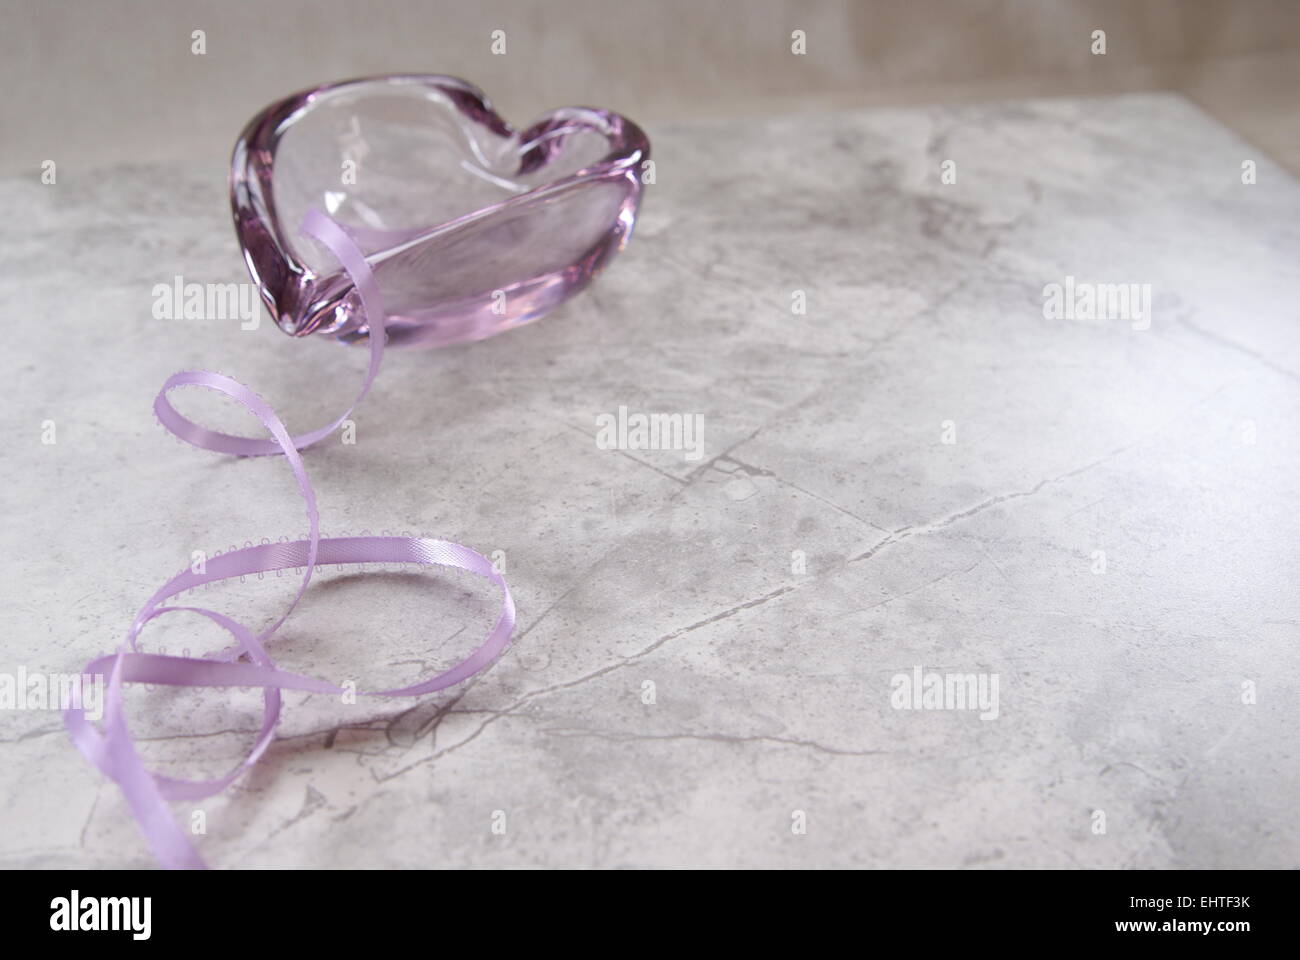 Soft lavender pastel ribbon curls towards a heart shaped light purple, lavender glass dish in the background. Marble surface. Stock Photo